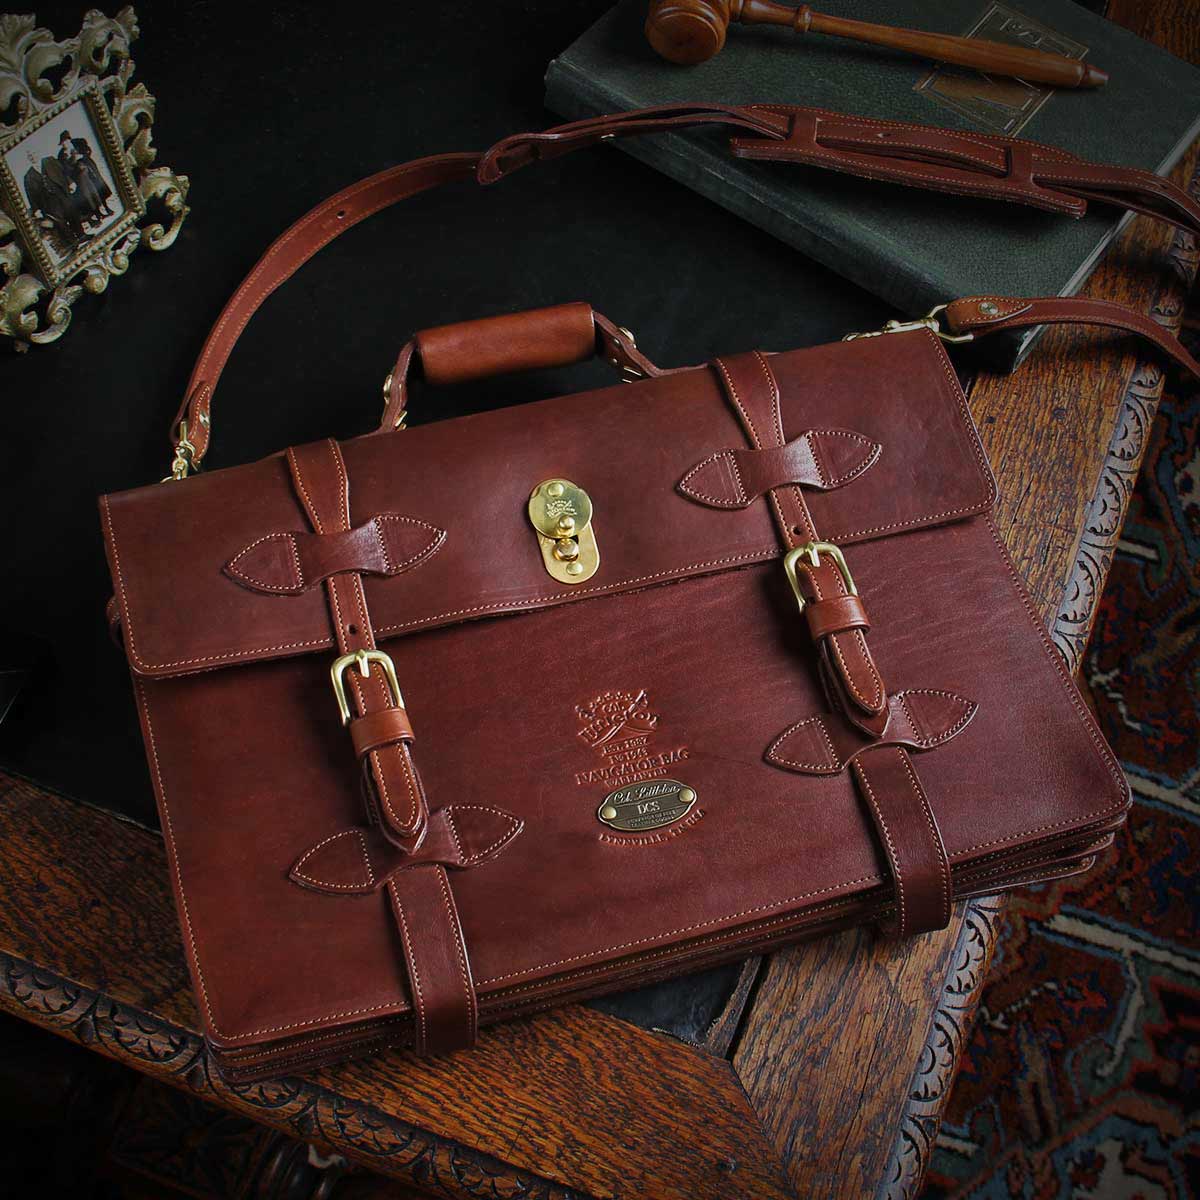 Styles and Types of Leather Briefcases